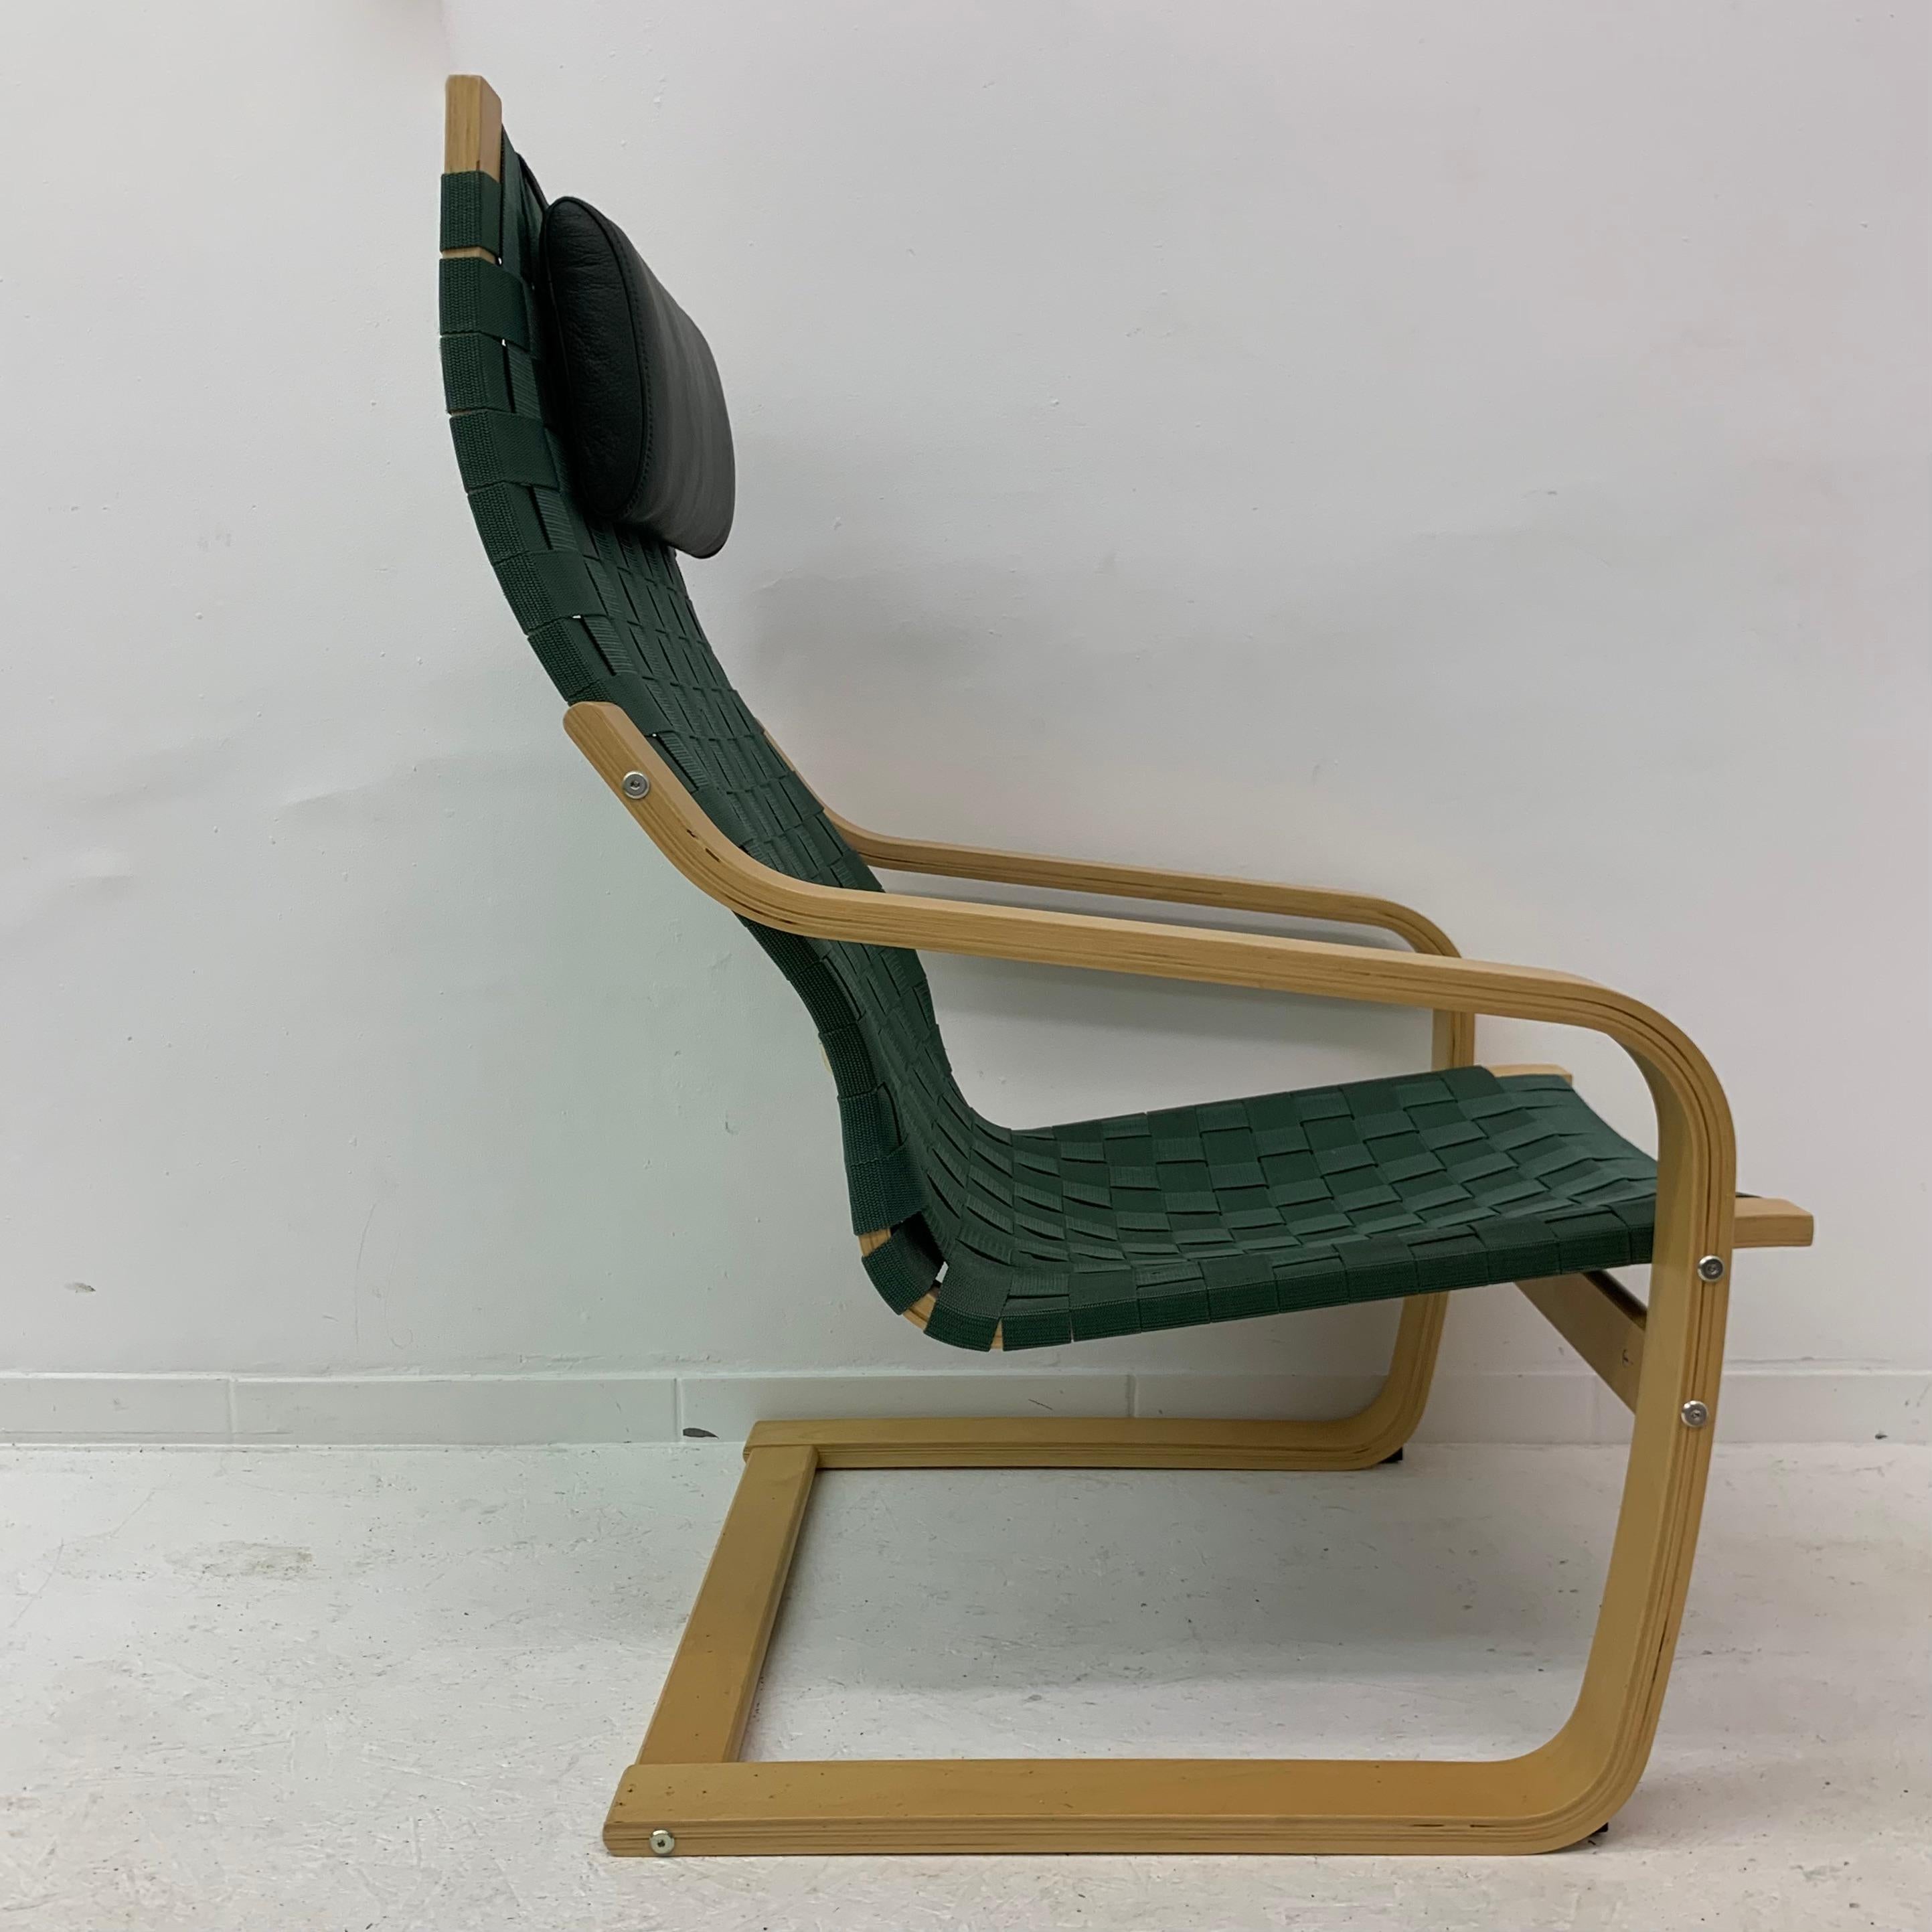 Limited Edition Aalto Tribute Points Chair by Noboru Nakamura for Ikea, 1999 For Sale 3